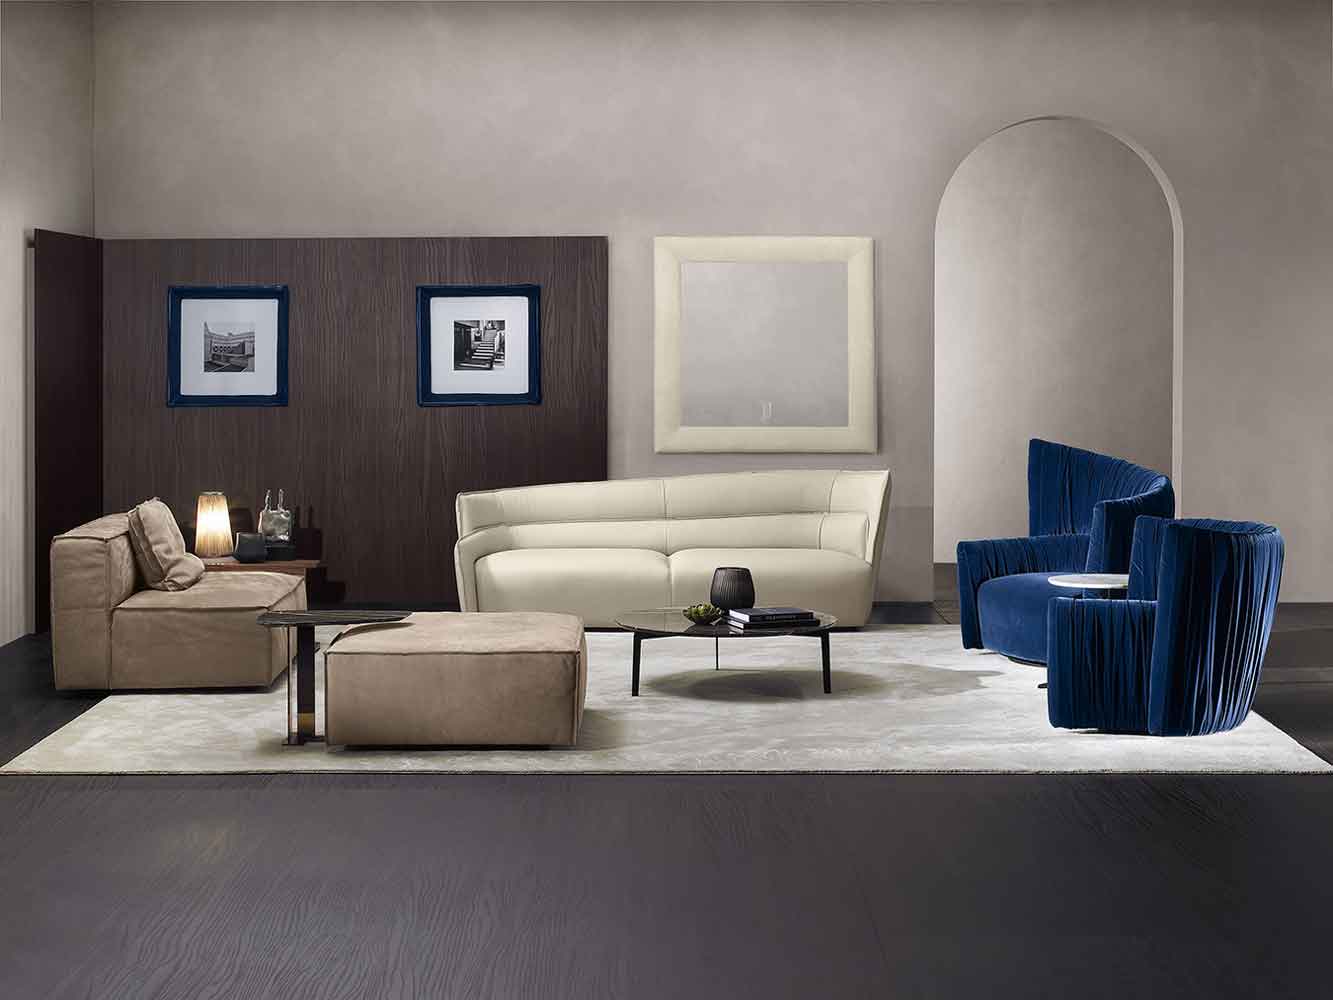 leather 3-seater sofa for living room, white leather sofa, blue velvet armchairs with horizontal lines, brown leather sofa with its own puff, mple veloudes polithrones, aspros dermatinos kanapes, kafe dermatinos kanames xoris podia, kanapes xoris podia, s